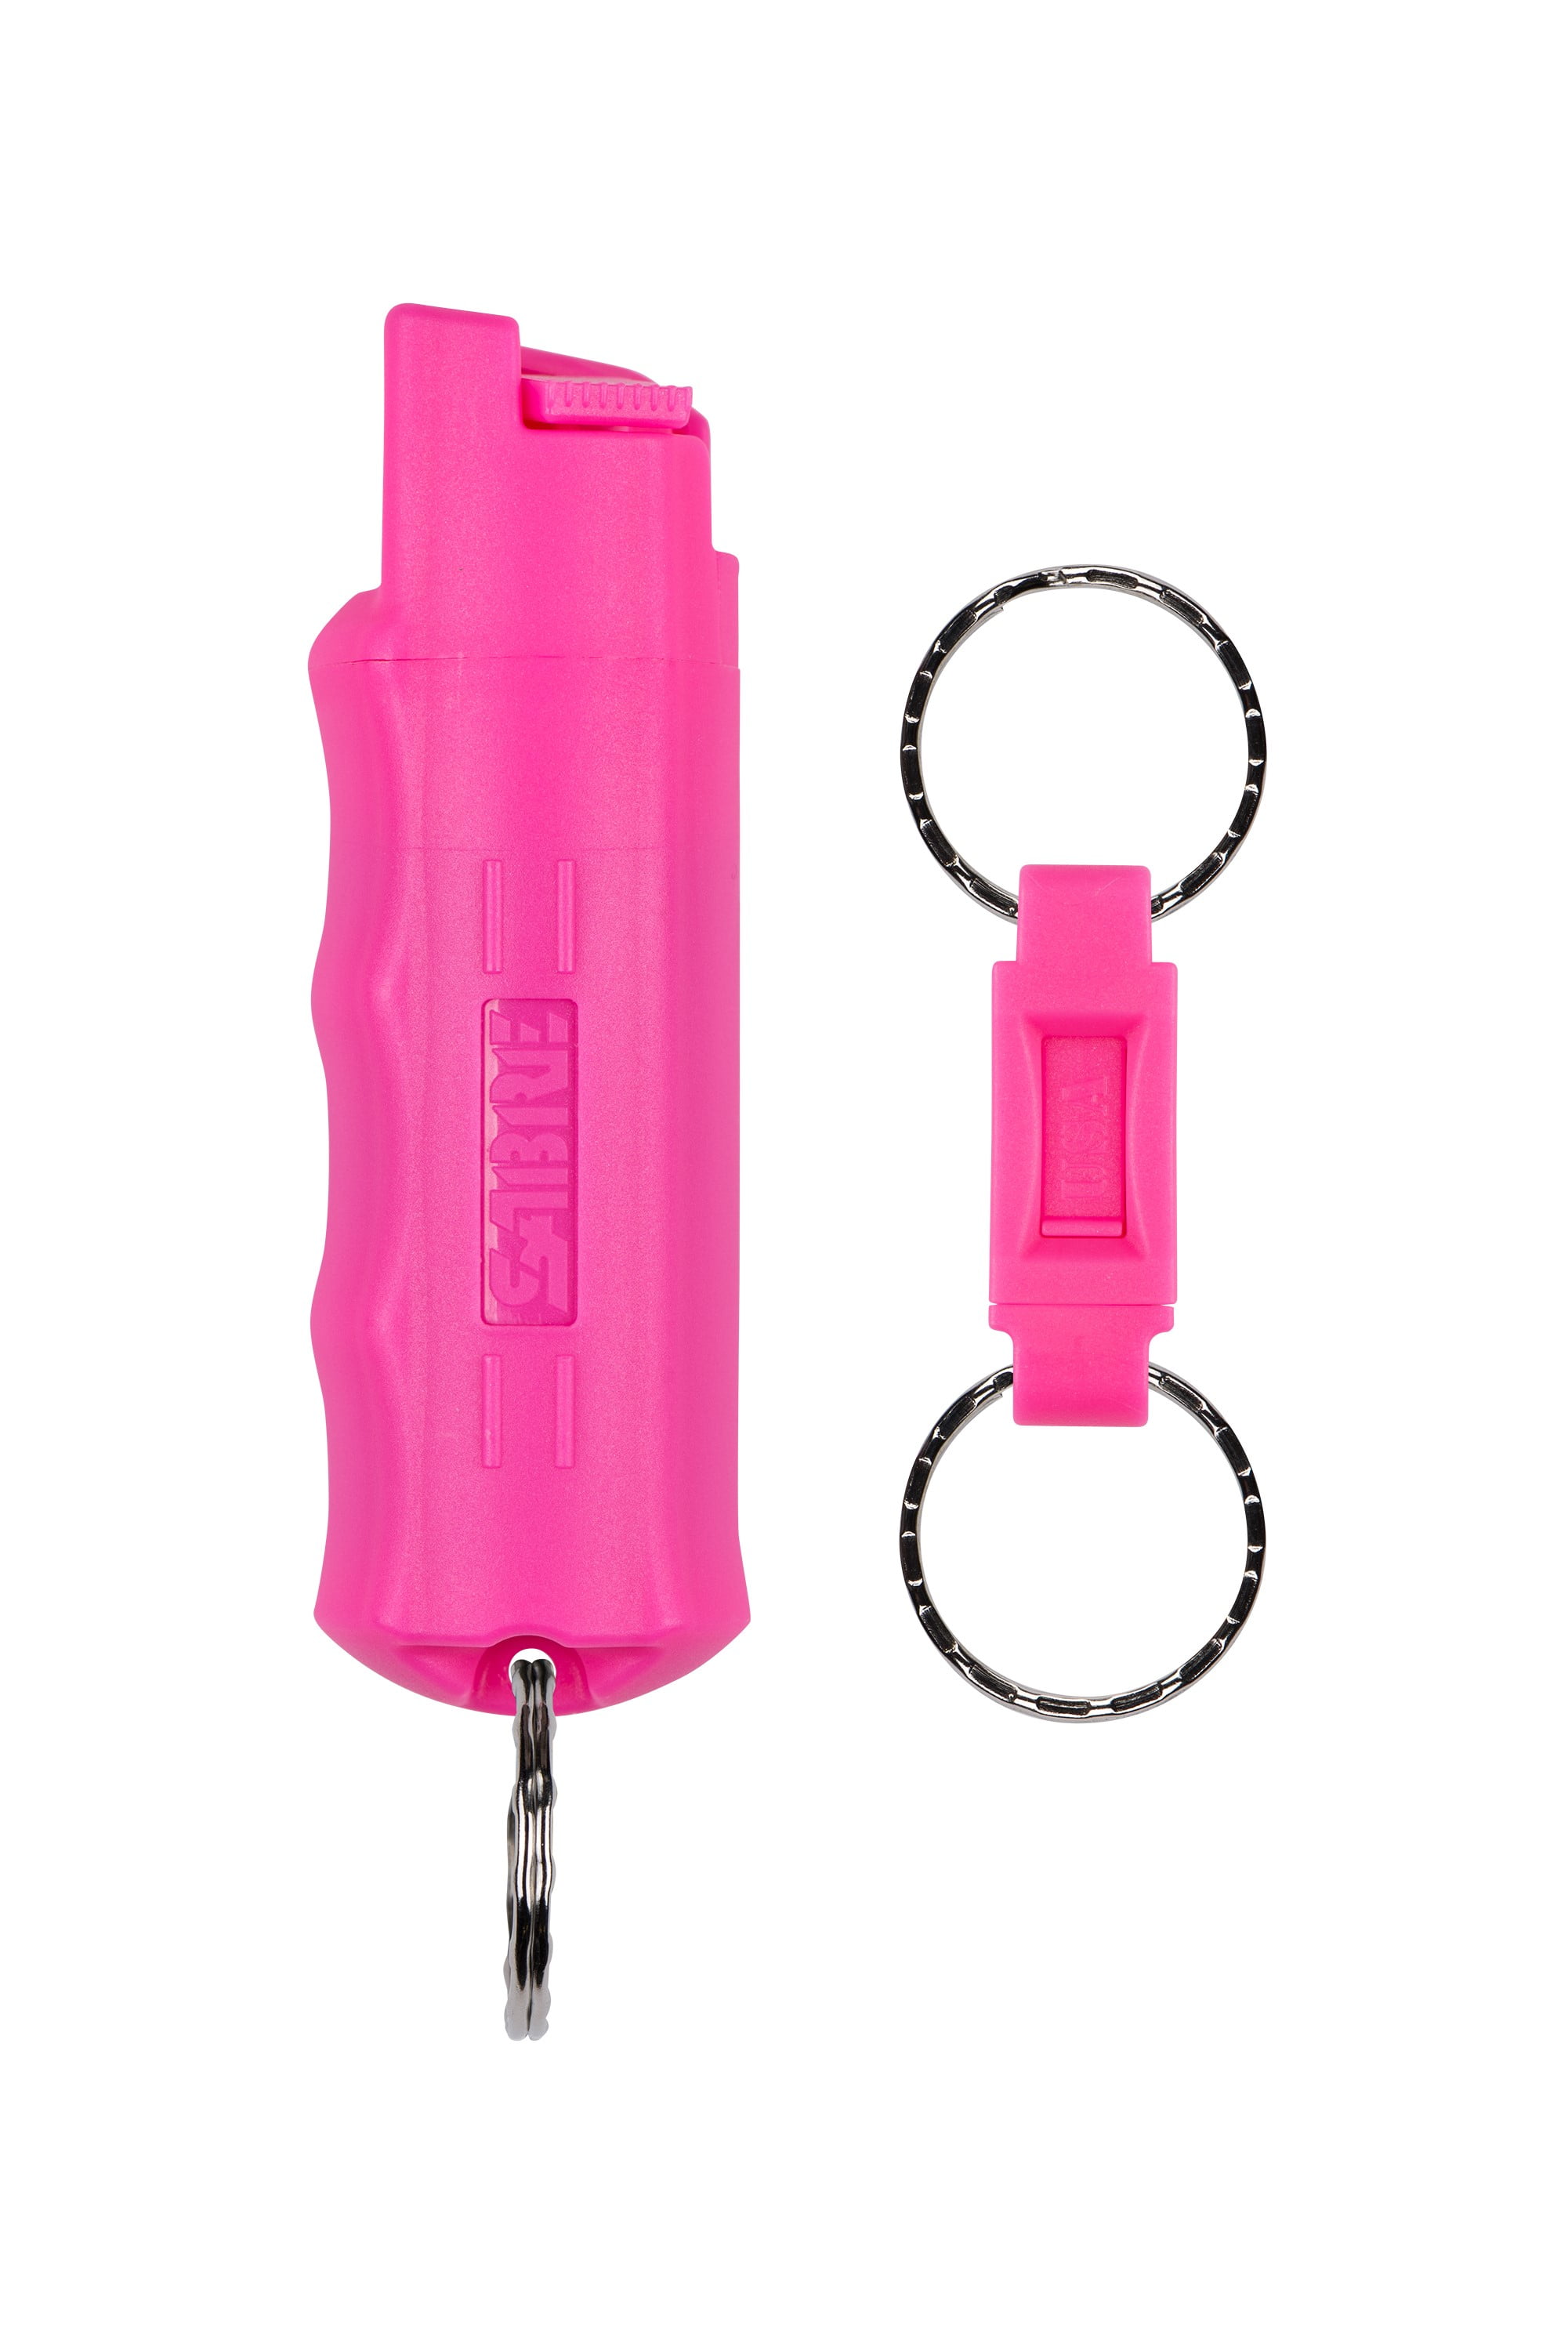 SABRE Pepper Spray Keychain with Quick Release Key Ring in Mint Green  HC-14-MT-02 - The Home Depot